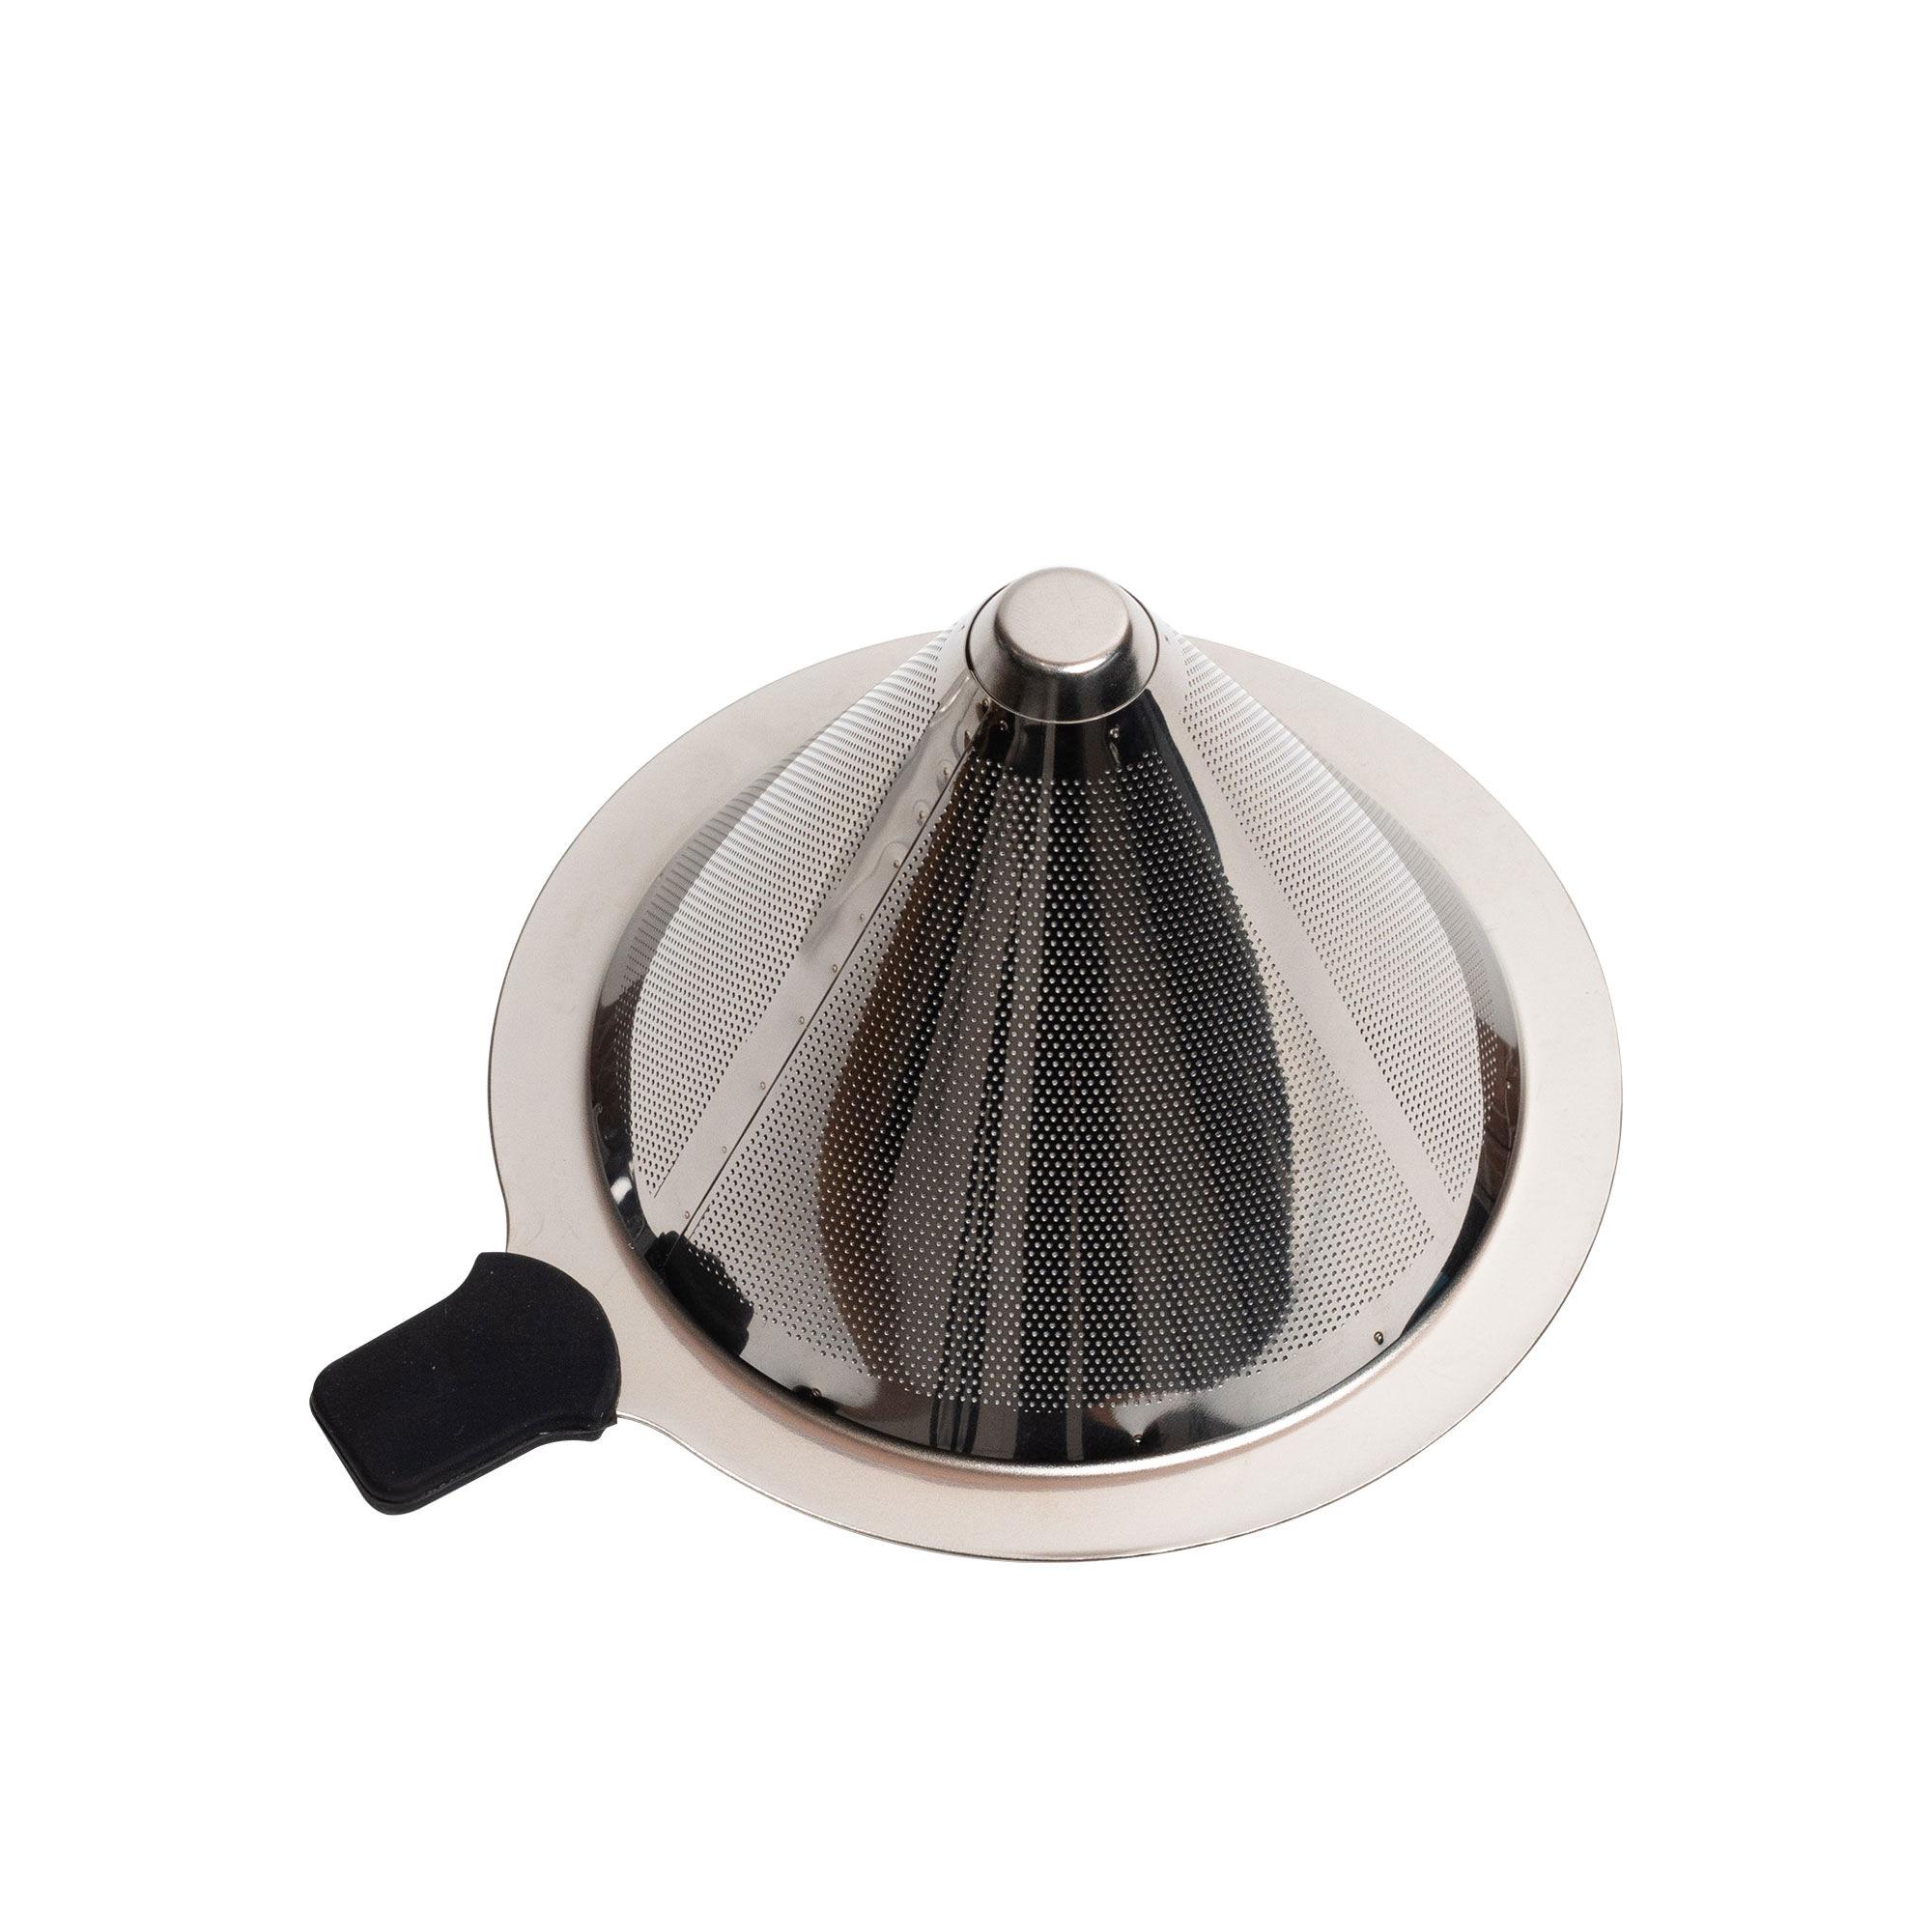 Coffee Culture Pour Over Coffee Maker 400ml Image 3